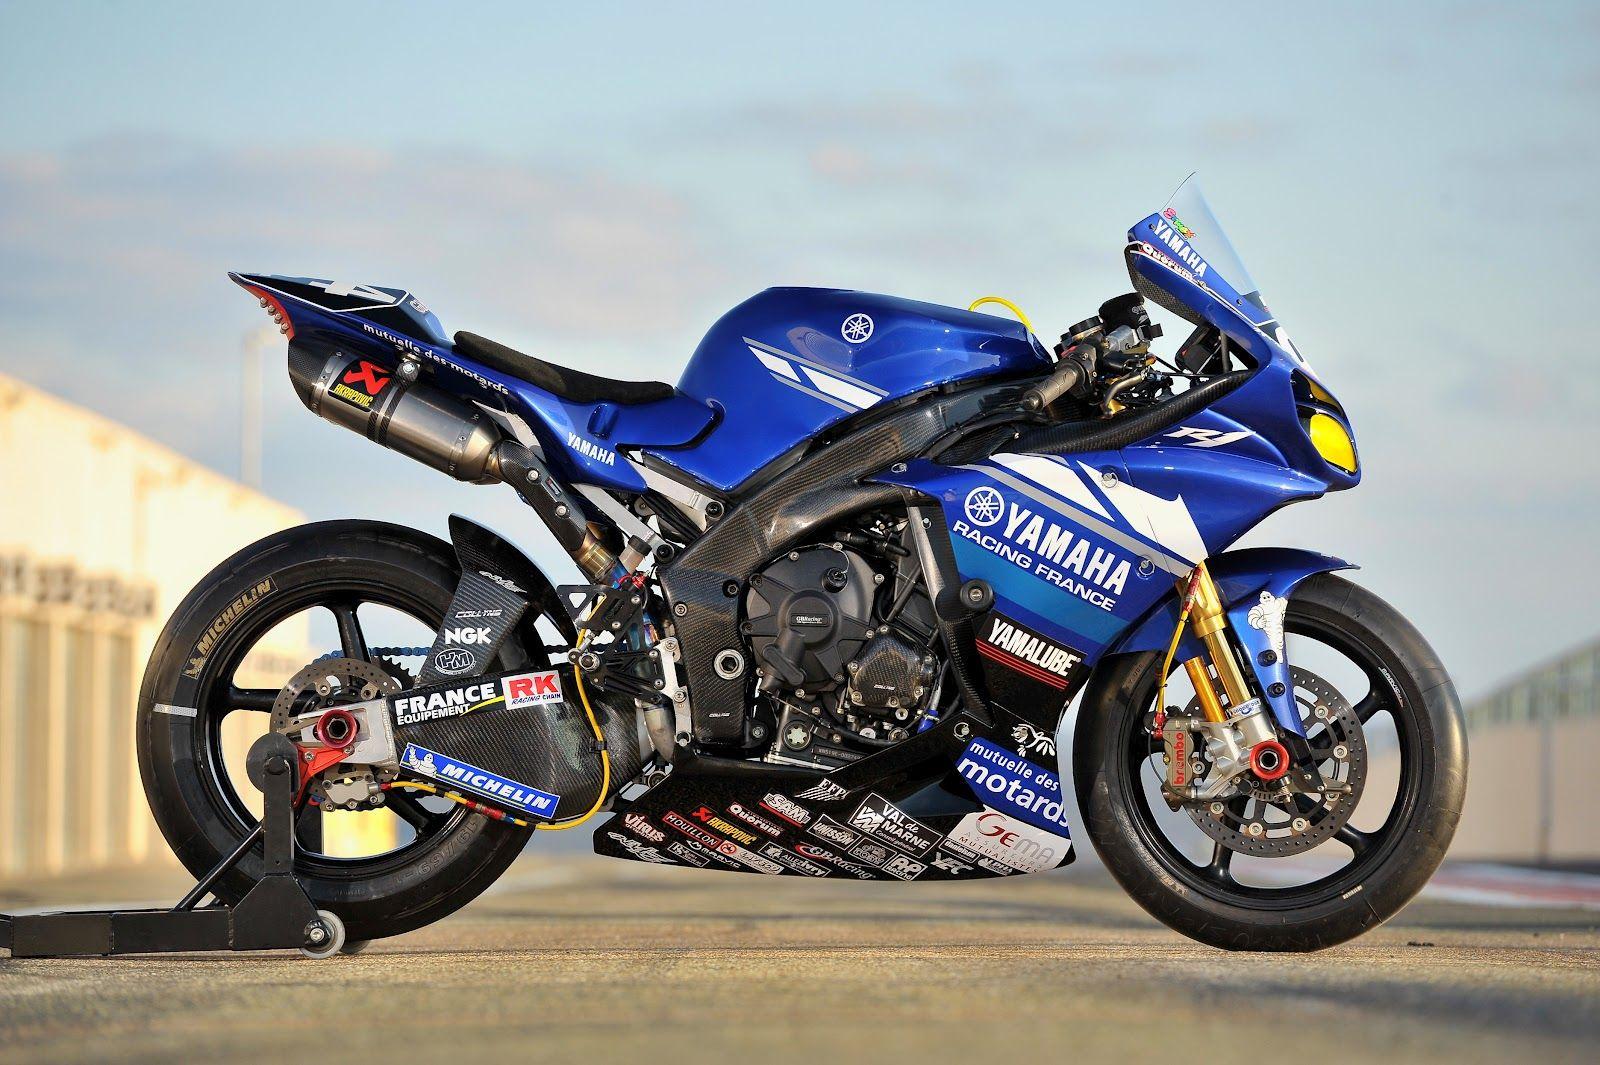 Motorcycles image YAMAHA YZF R1 HD wallpaper and background photo